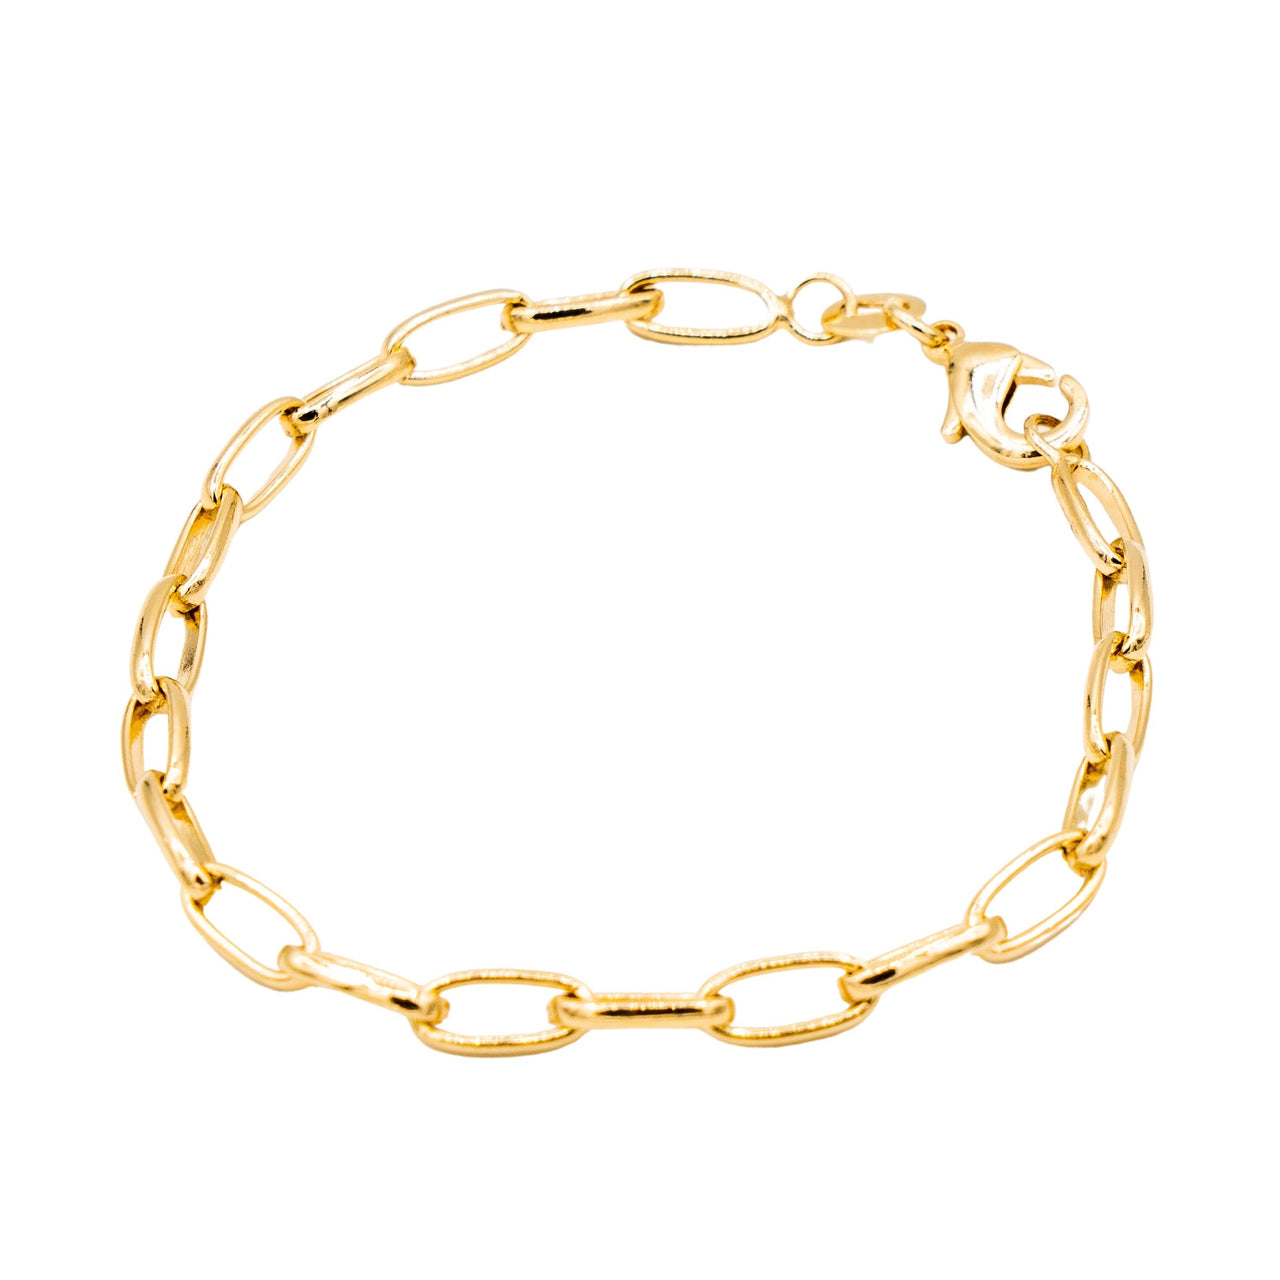 The 18k Gold Filled Round Chain Link Bracelet